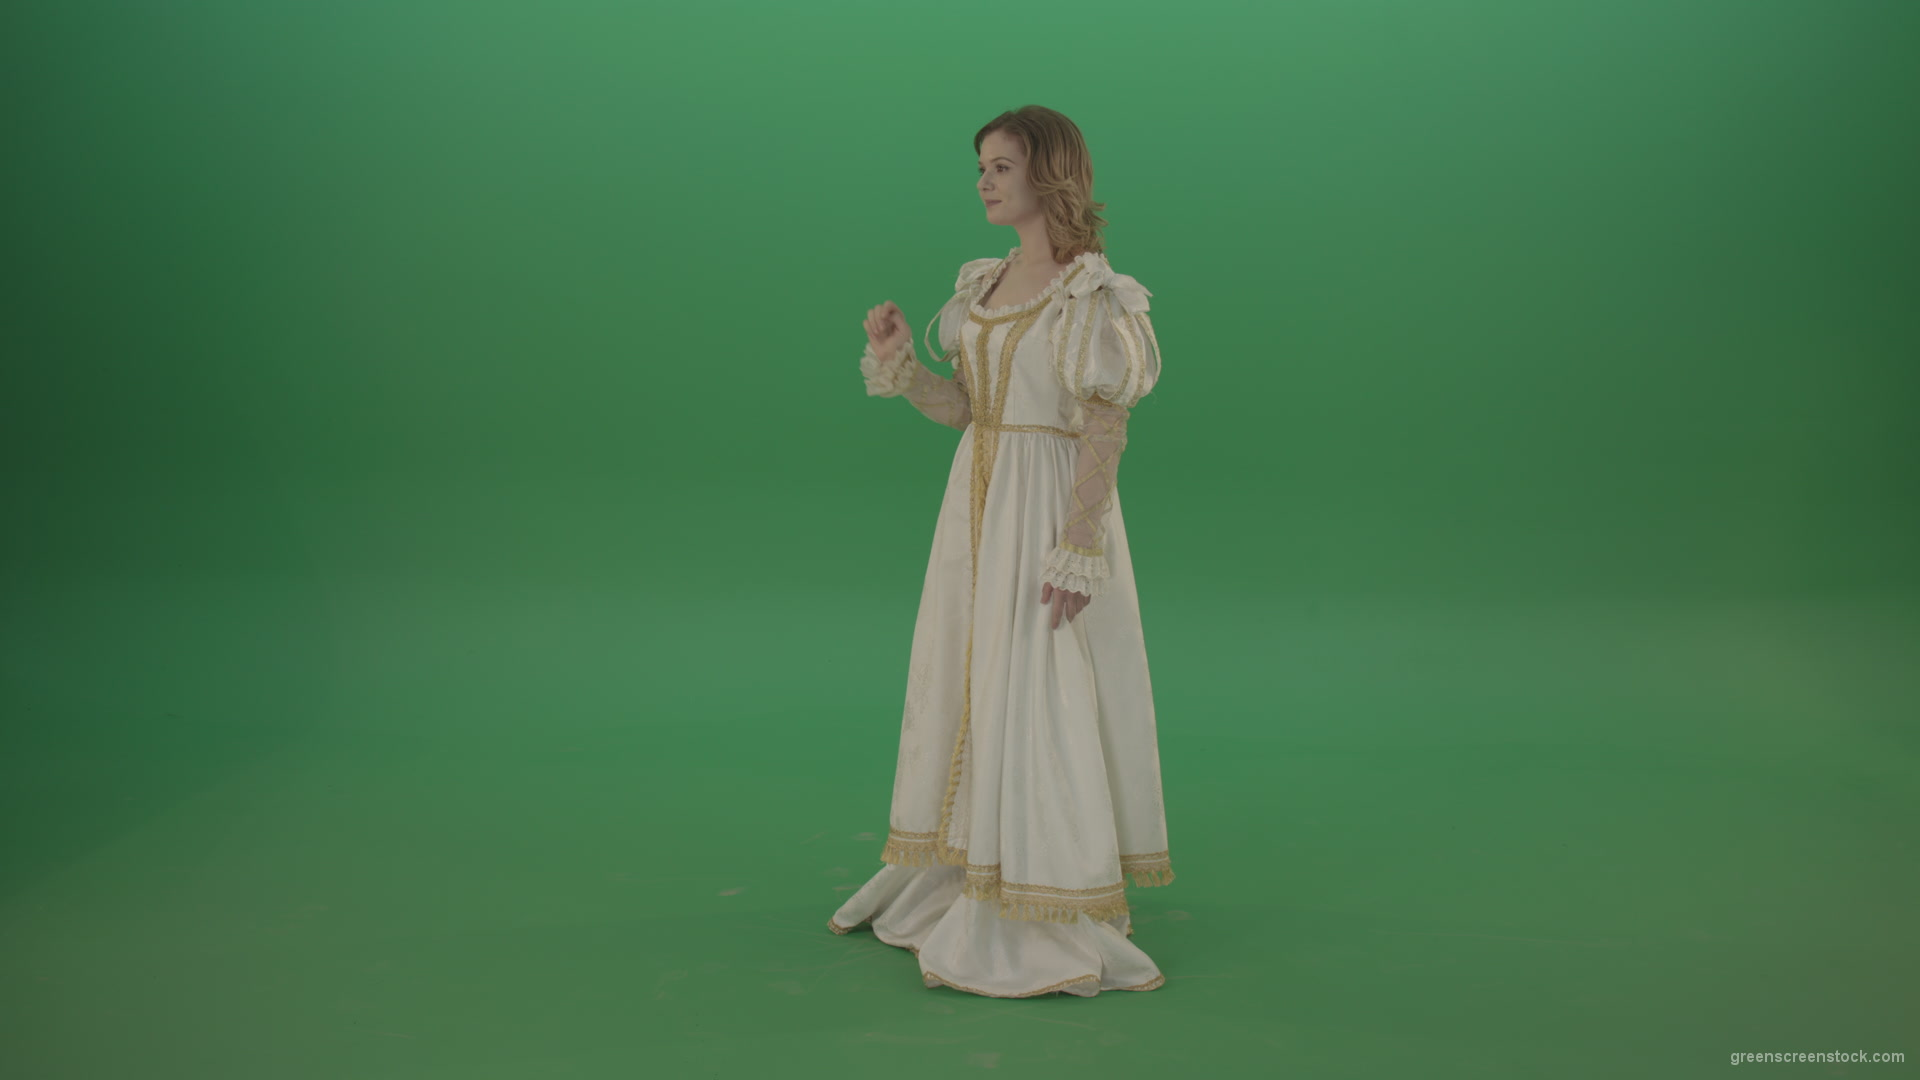 Finding-a-girl-on-the-touch-screen-is-looking-at-the-photo-with-pleasure-isolated-on-green-screen_008 Green Screen Stock